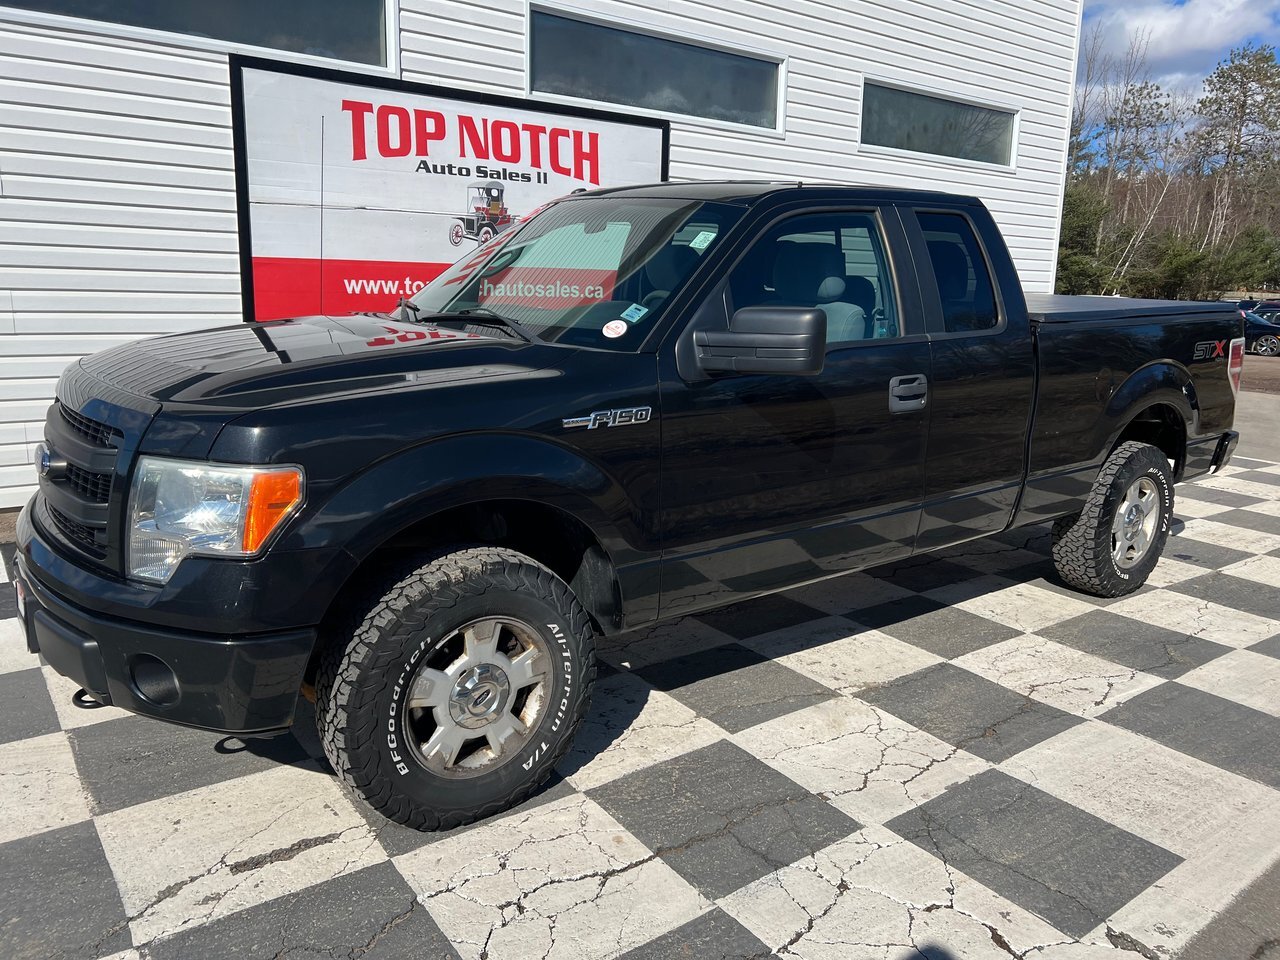 2014 Ford F-150 XLT STX - 4WD, Alloys, Tow PKG, Bed liner, Cruise